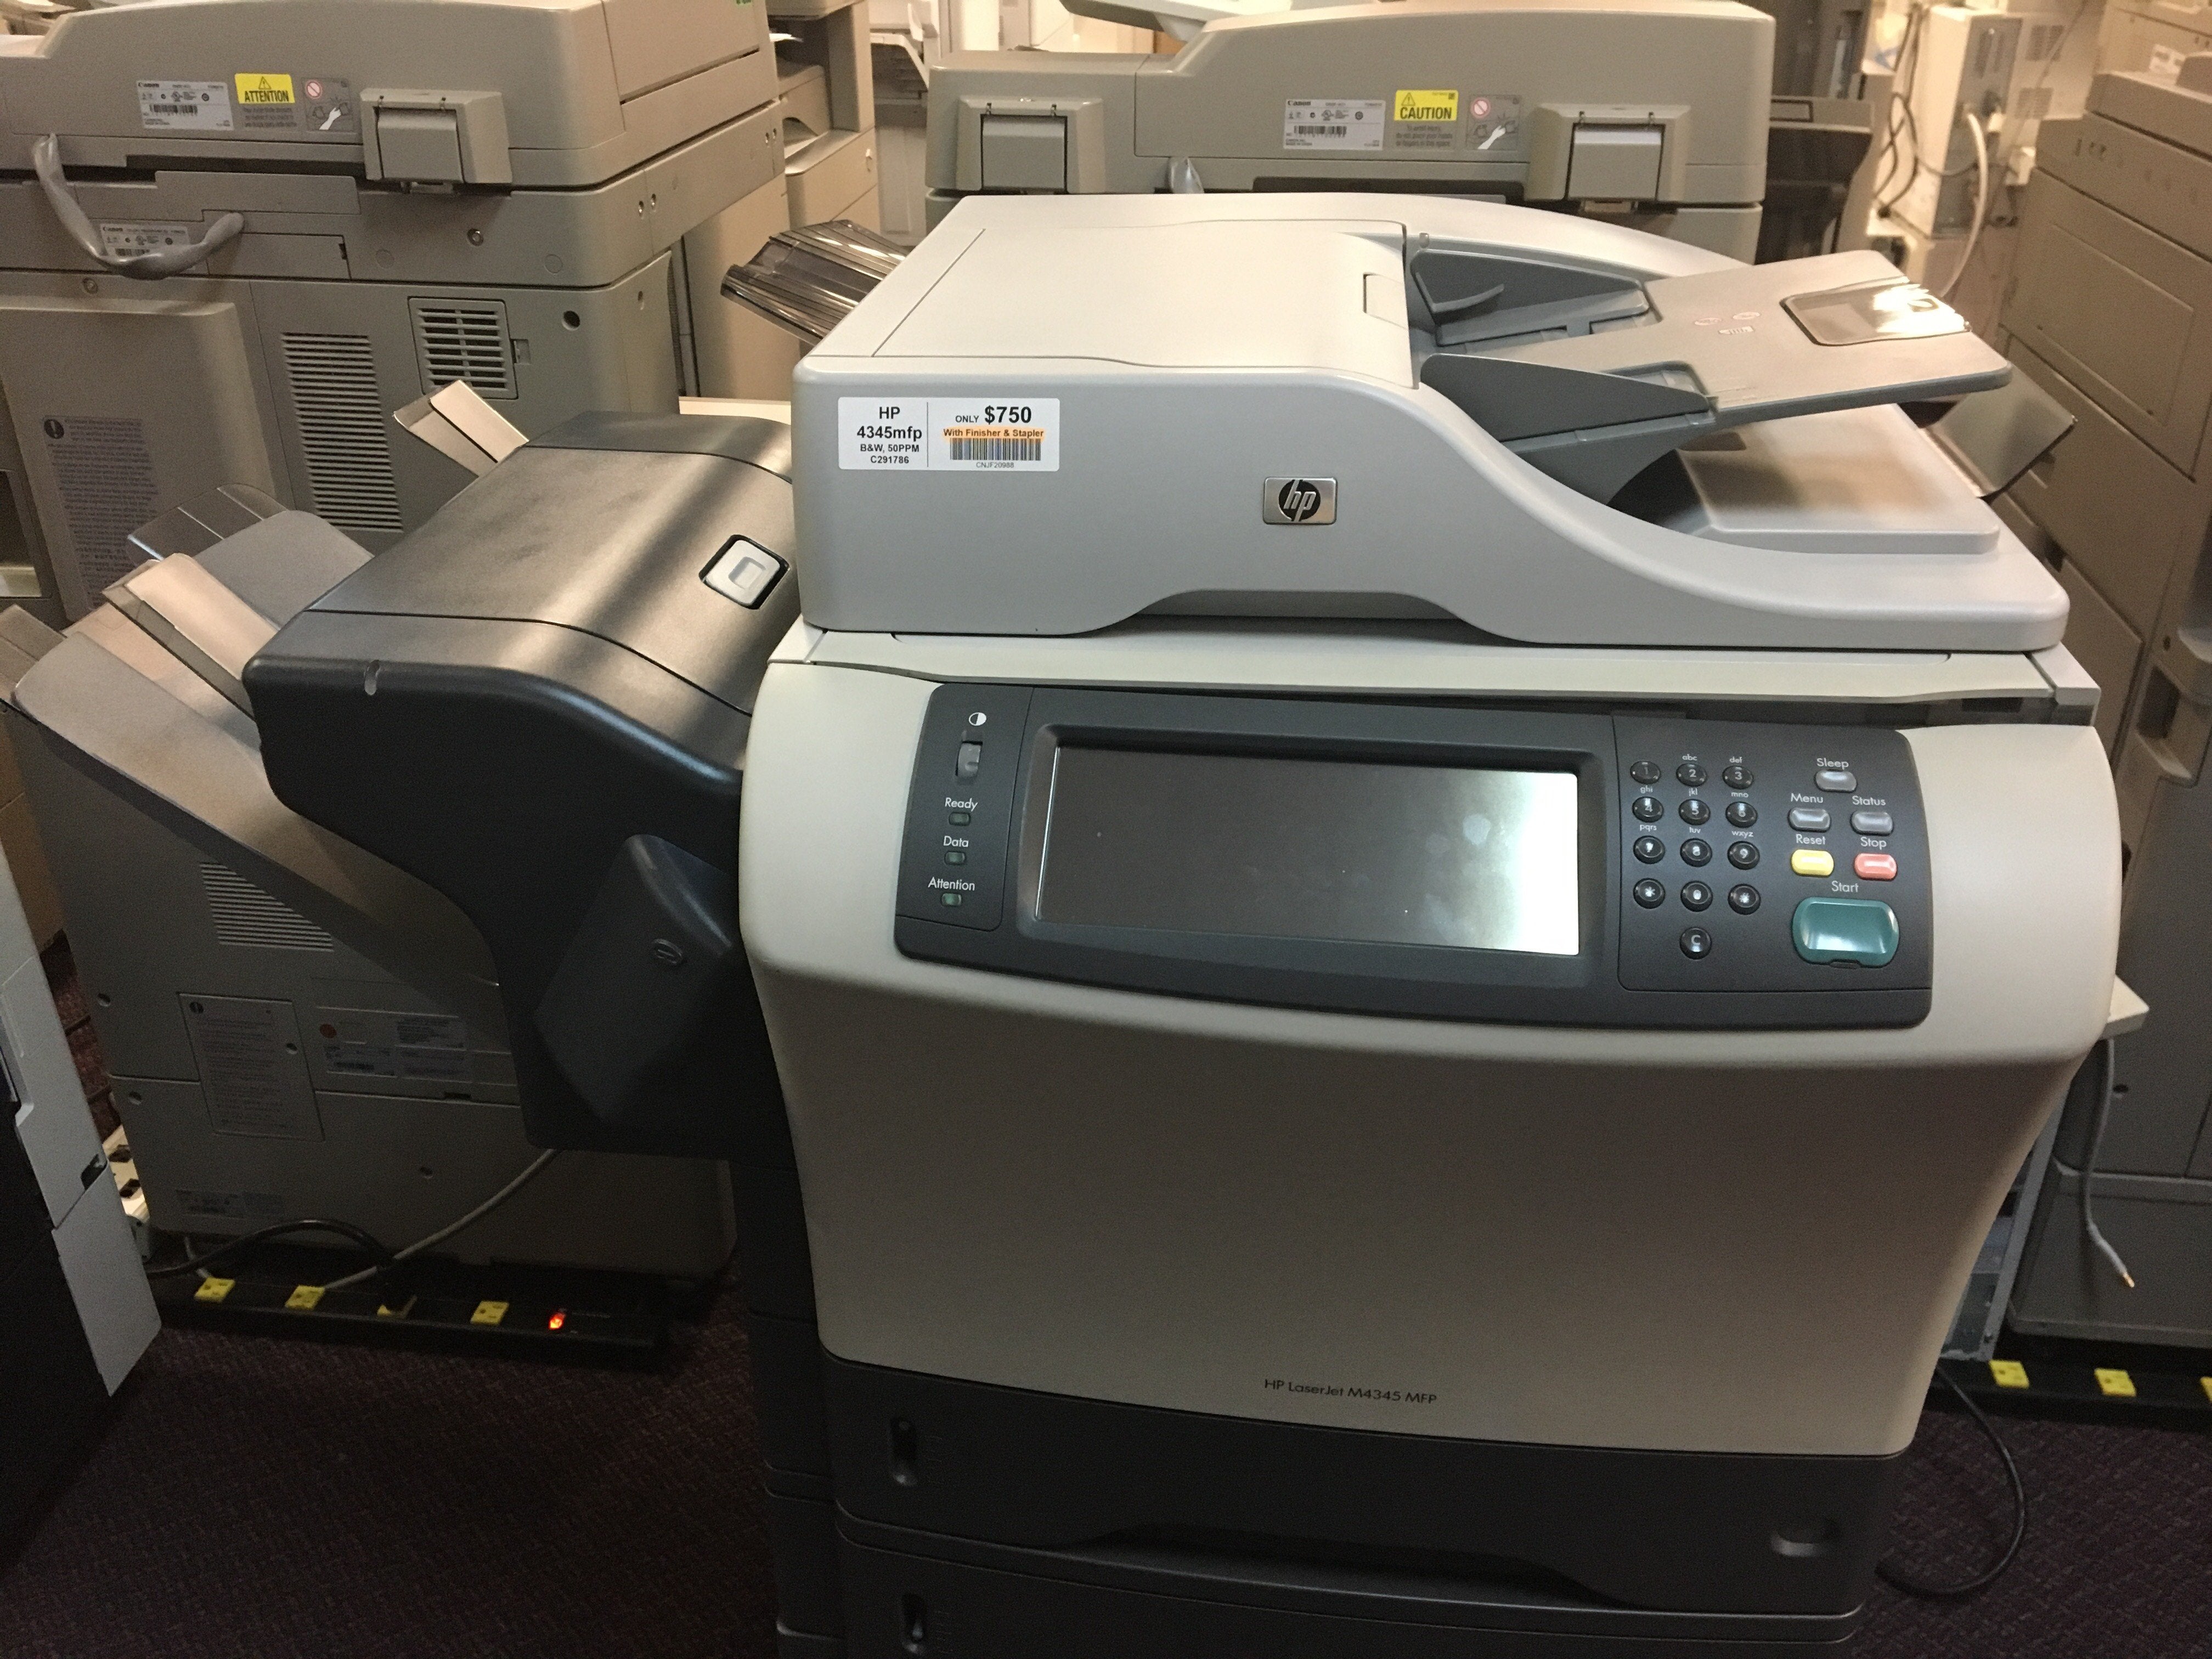 HP 4345mfp 4345 Monochrome Copier Printer Scanner with Stapler Finisher Off-Lease Photocopier Great Deal